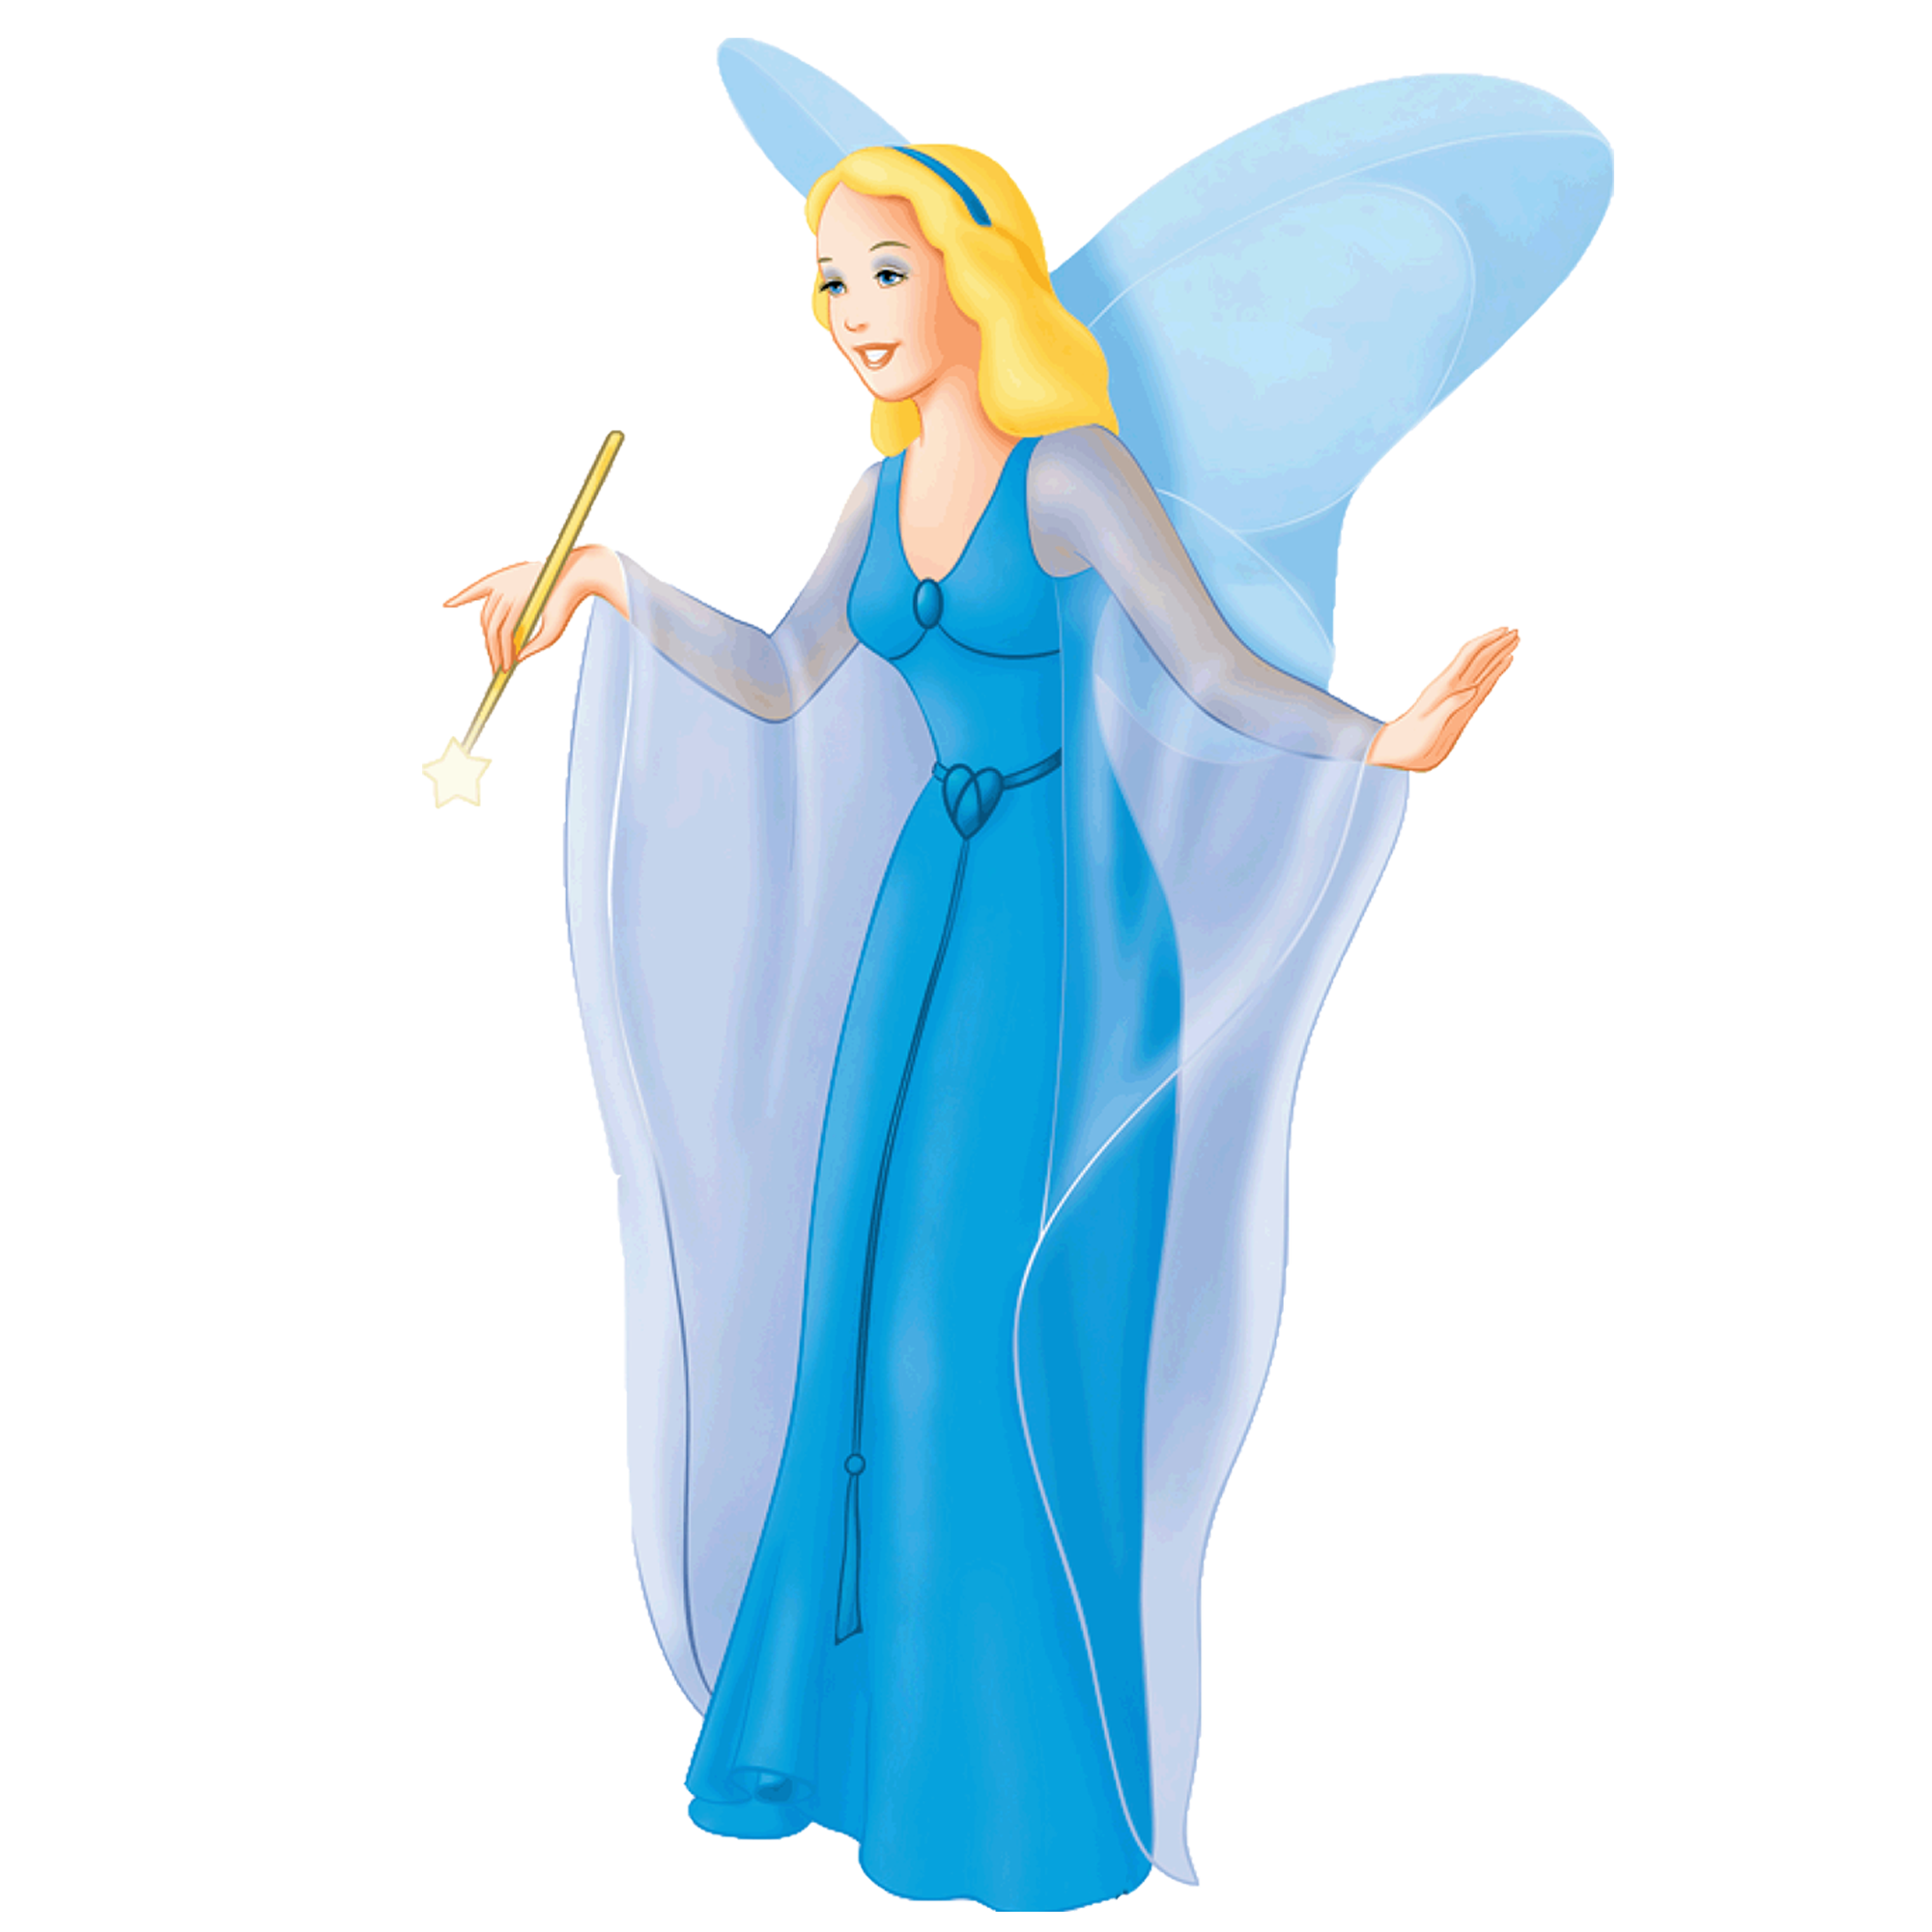 Moving clipart angel. Blue fairy disney wiki